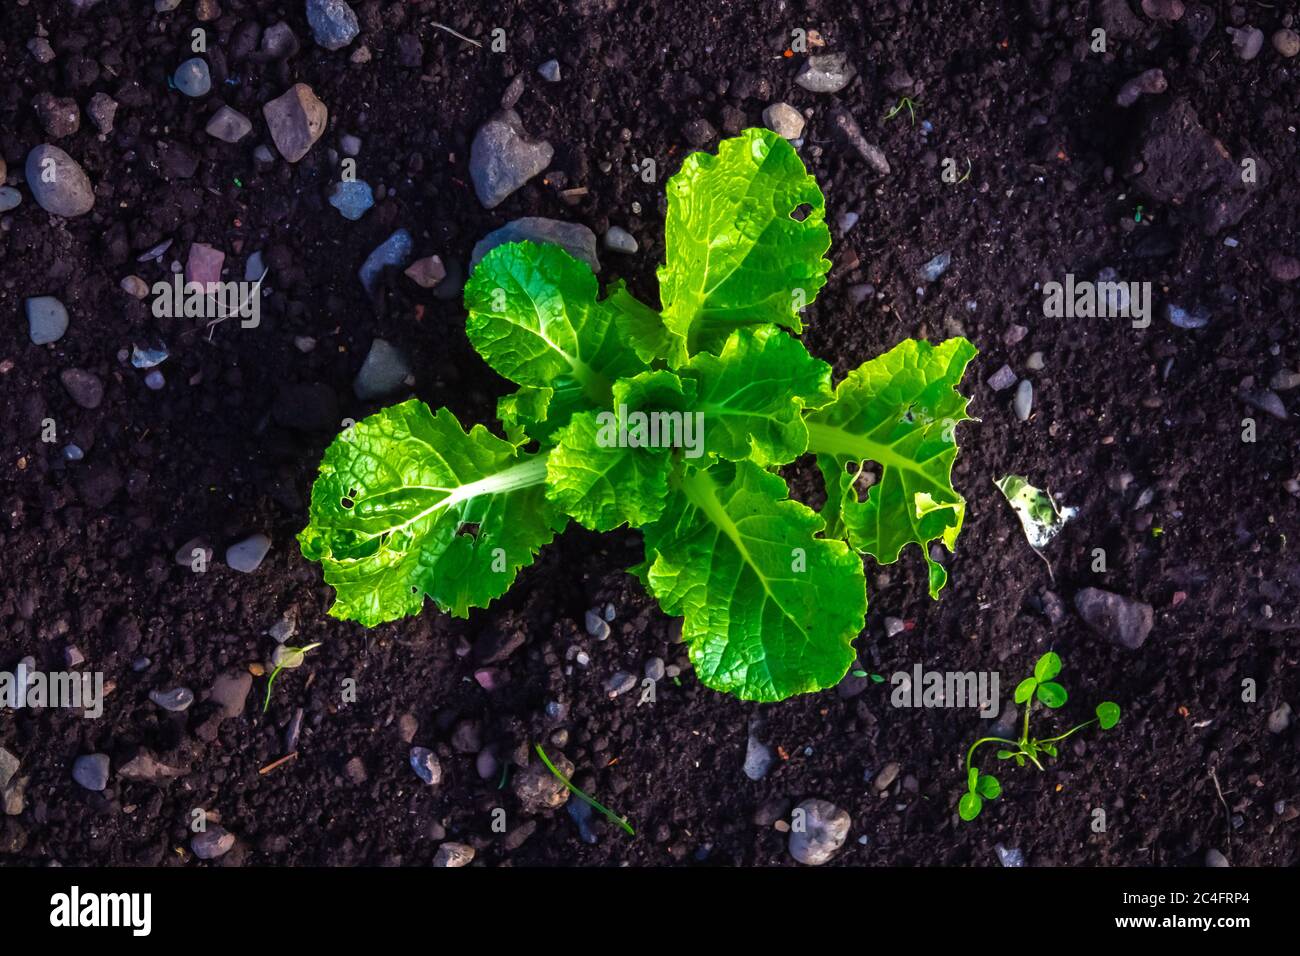 Conceptual Green Shoots Image Of A Young Plant Growing In Fertile Soil Stock Photo